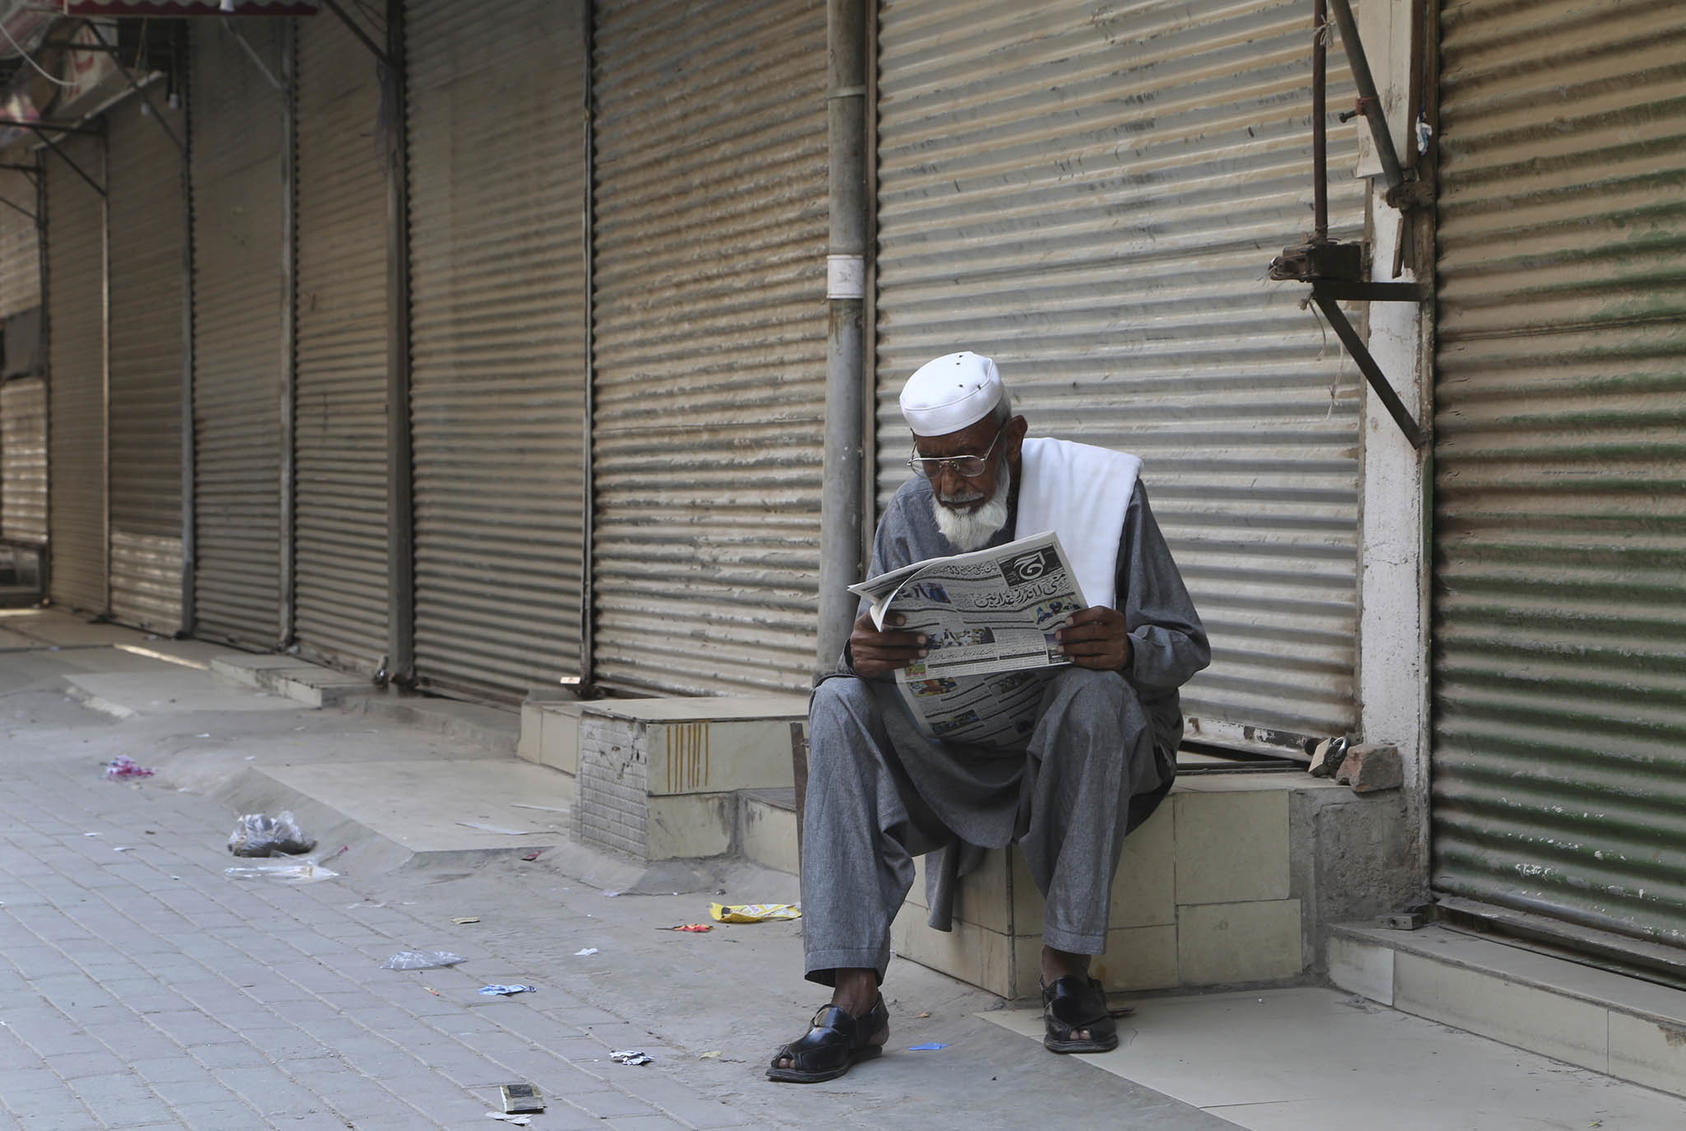 A man reads a morning newspaper at a market closed due to government COVID-19 restrictions in Peshawar, Pakistan, on May 1, 2021. (Photo by Muhammad Sajjad/AP)